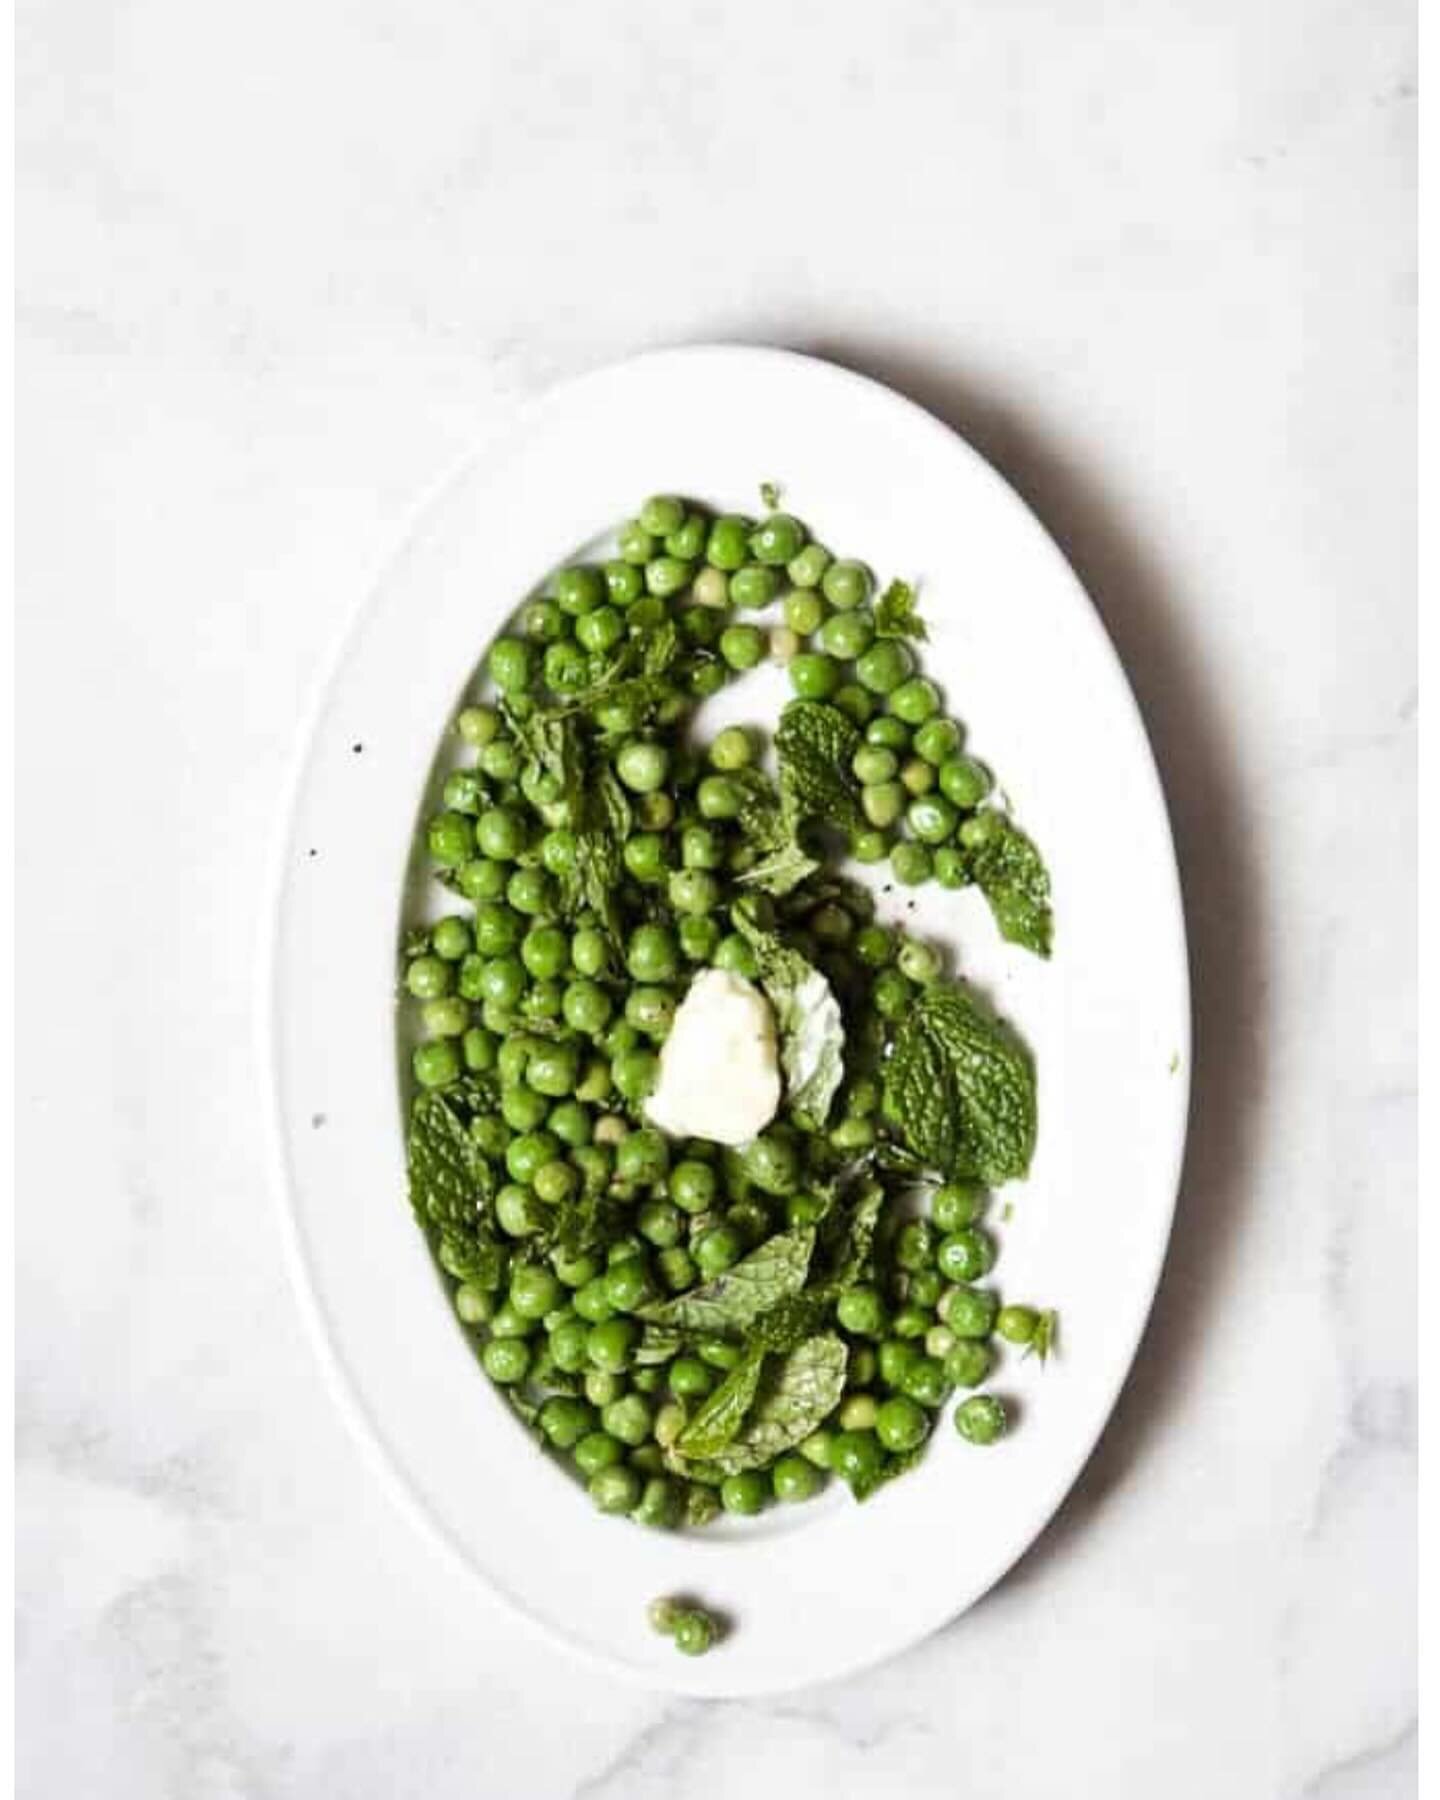 BEAUTIFUL FOOD BY DESIGN | TODAY FIRST DAY OF SPRING | Spring is but a moment, captured in a plate of Fresh English Peas with Mint. A simple little jewel from the kitchen.

TAP BIO FOR RECIPE 
https://bijouxs.com/fresh-english-peas-with-mint/
.
.
.
.